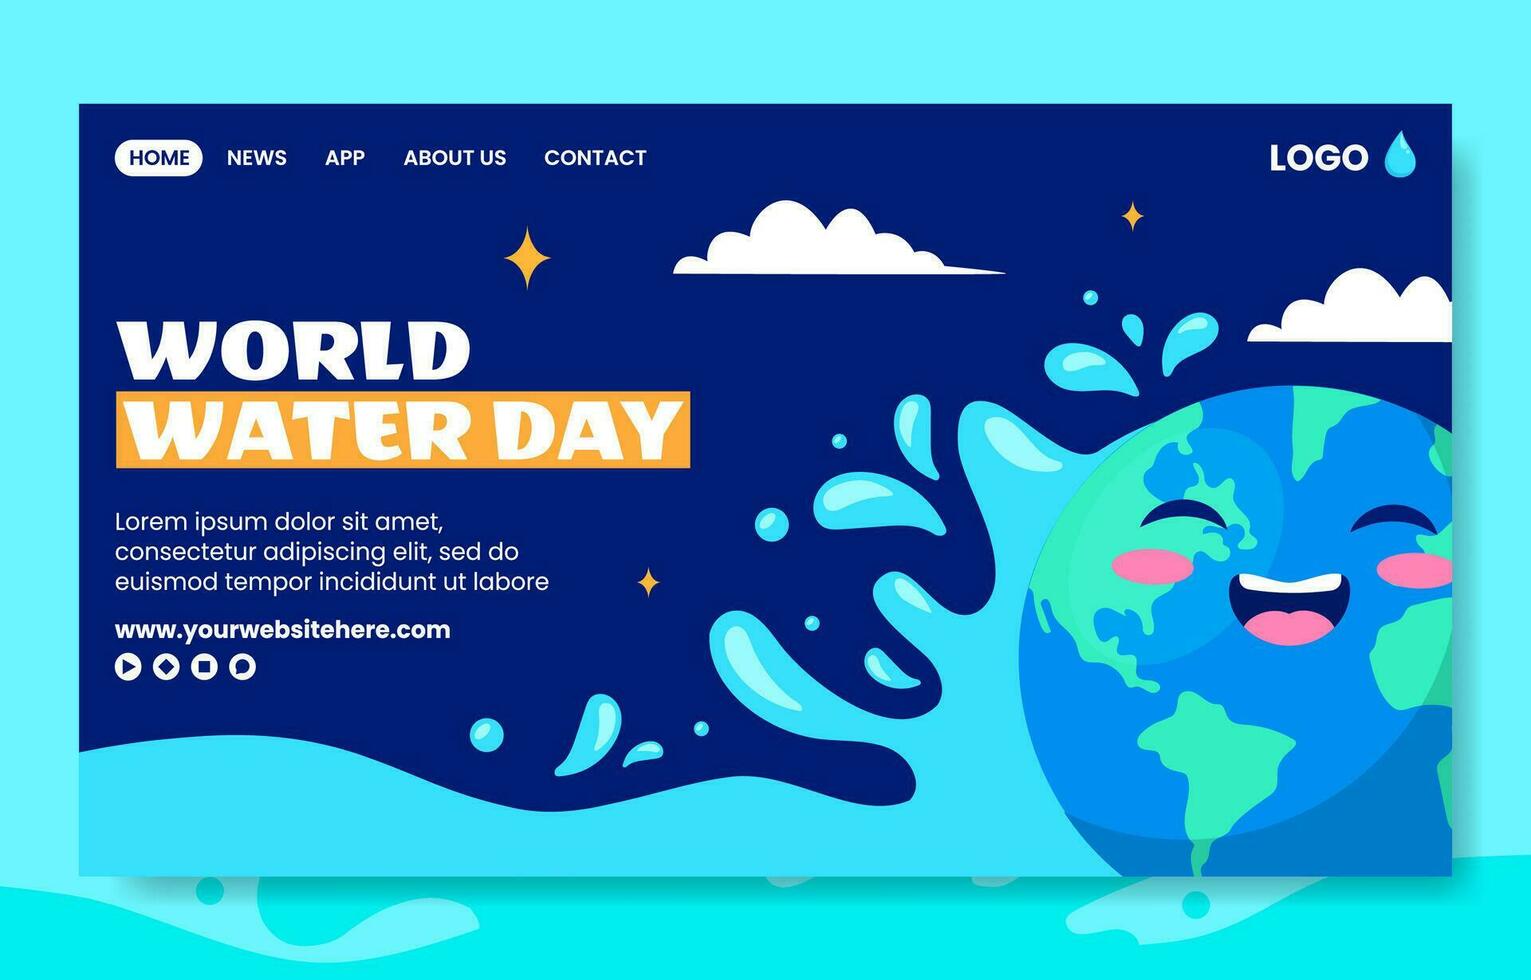 Water Day Social Media Landing Page Cartoon Hand Drawn Templates Background Illustration vector